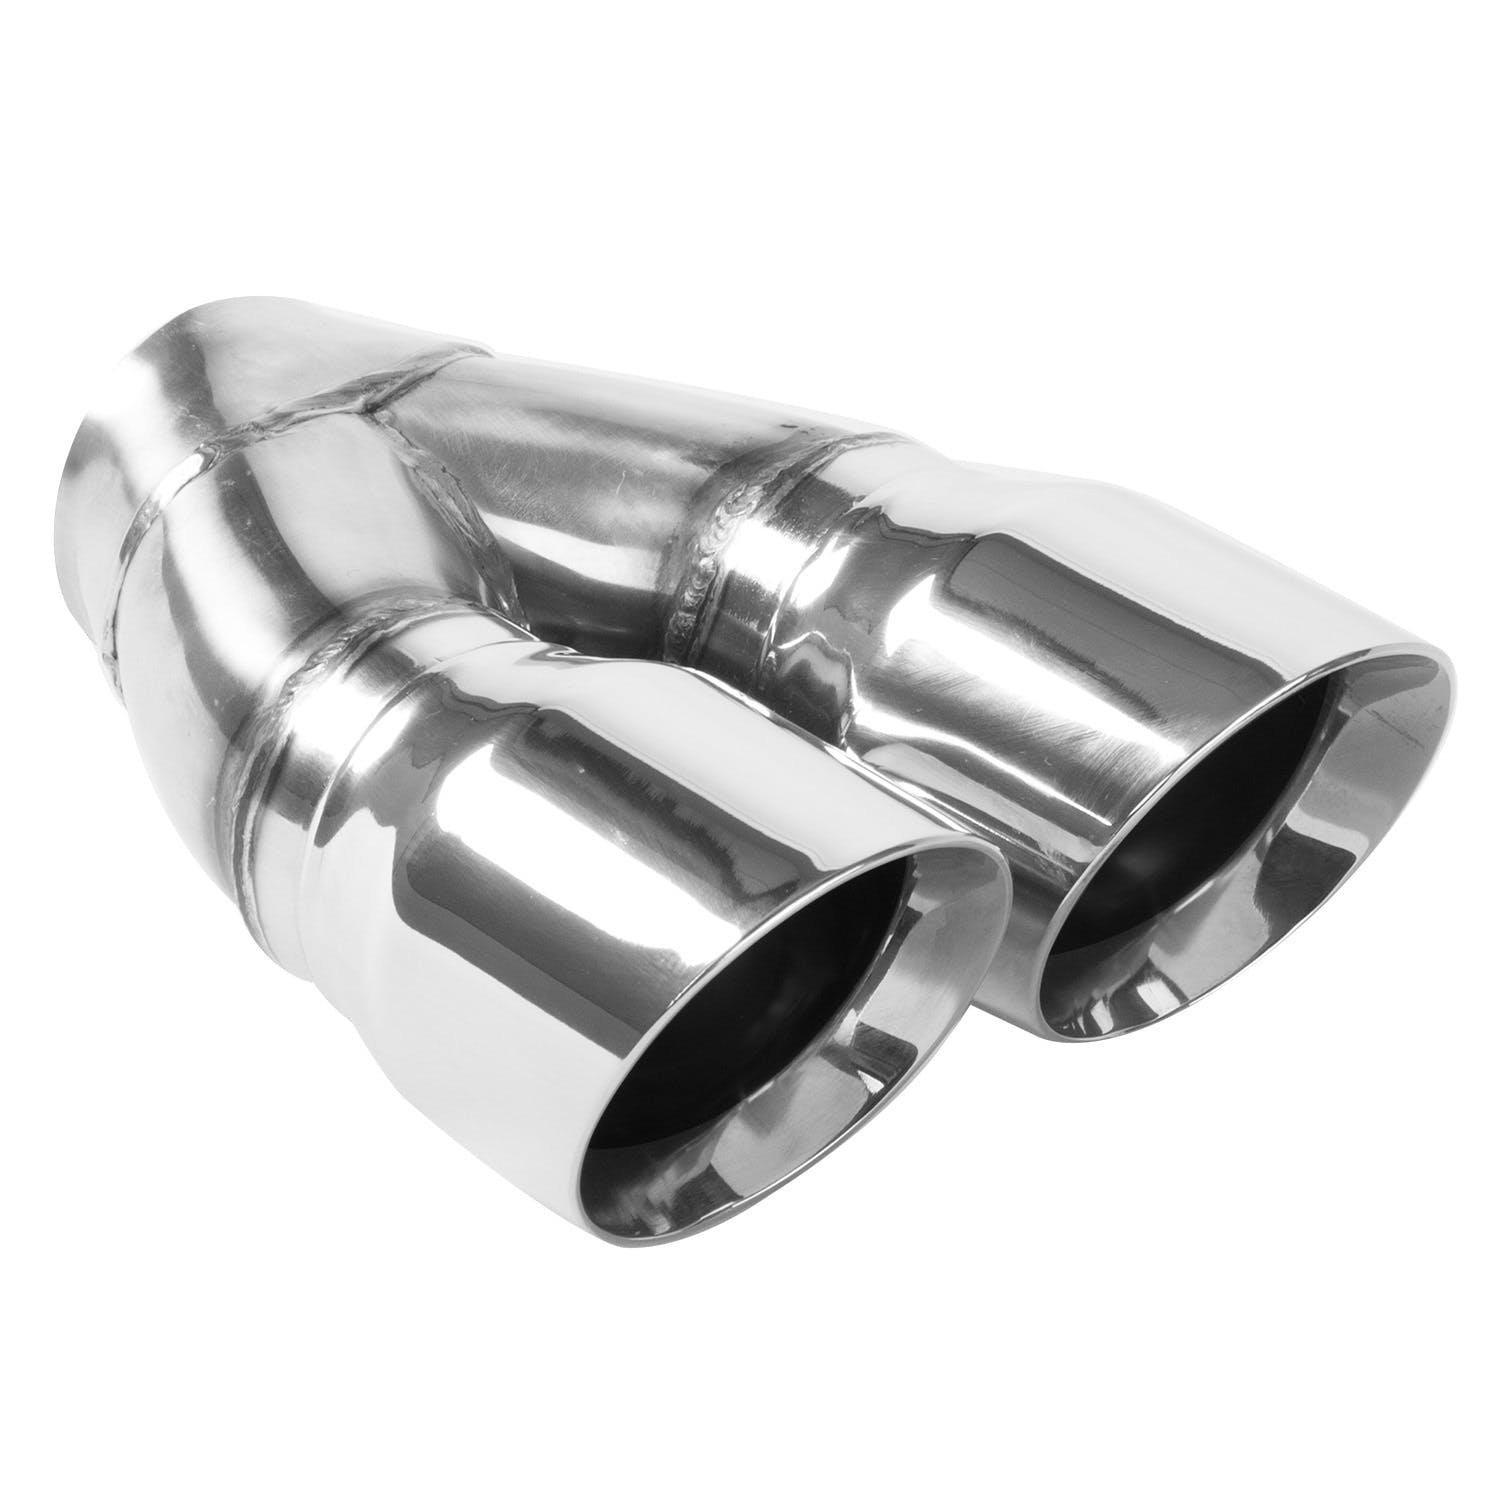 MagnaFlow Exhaust Products 35226 Tips